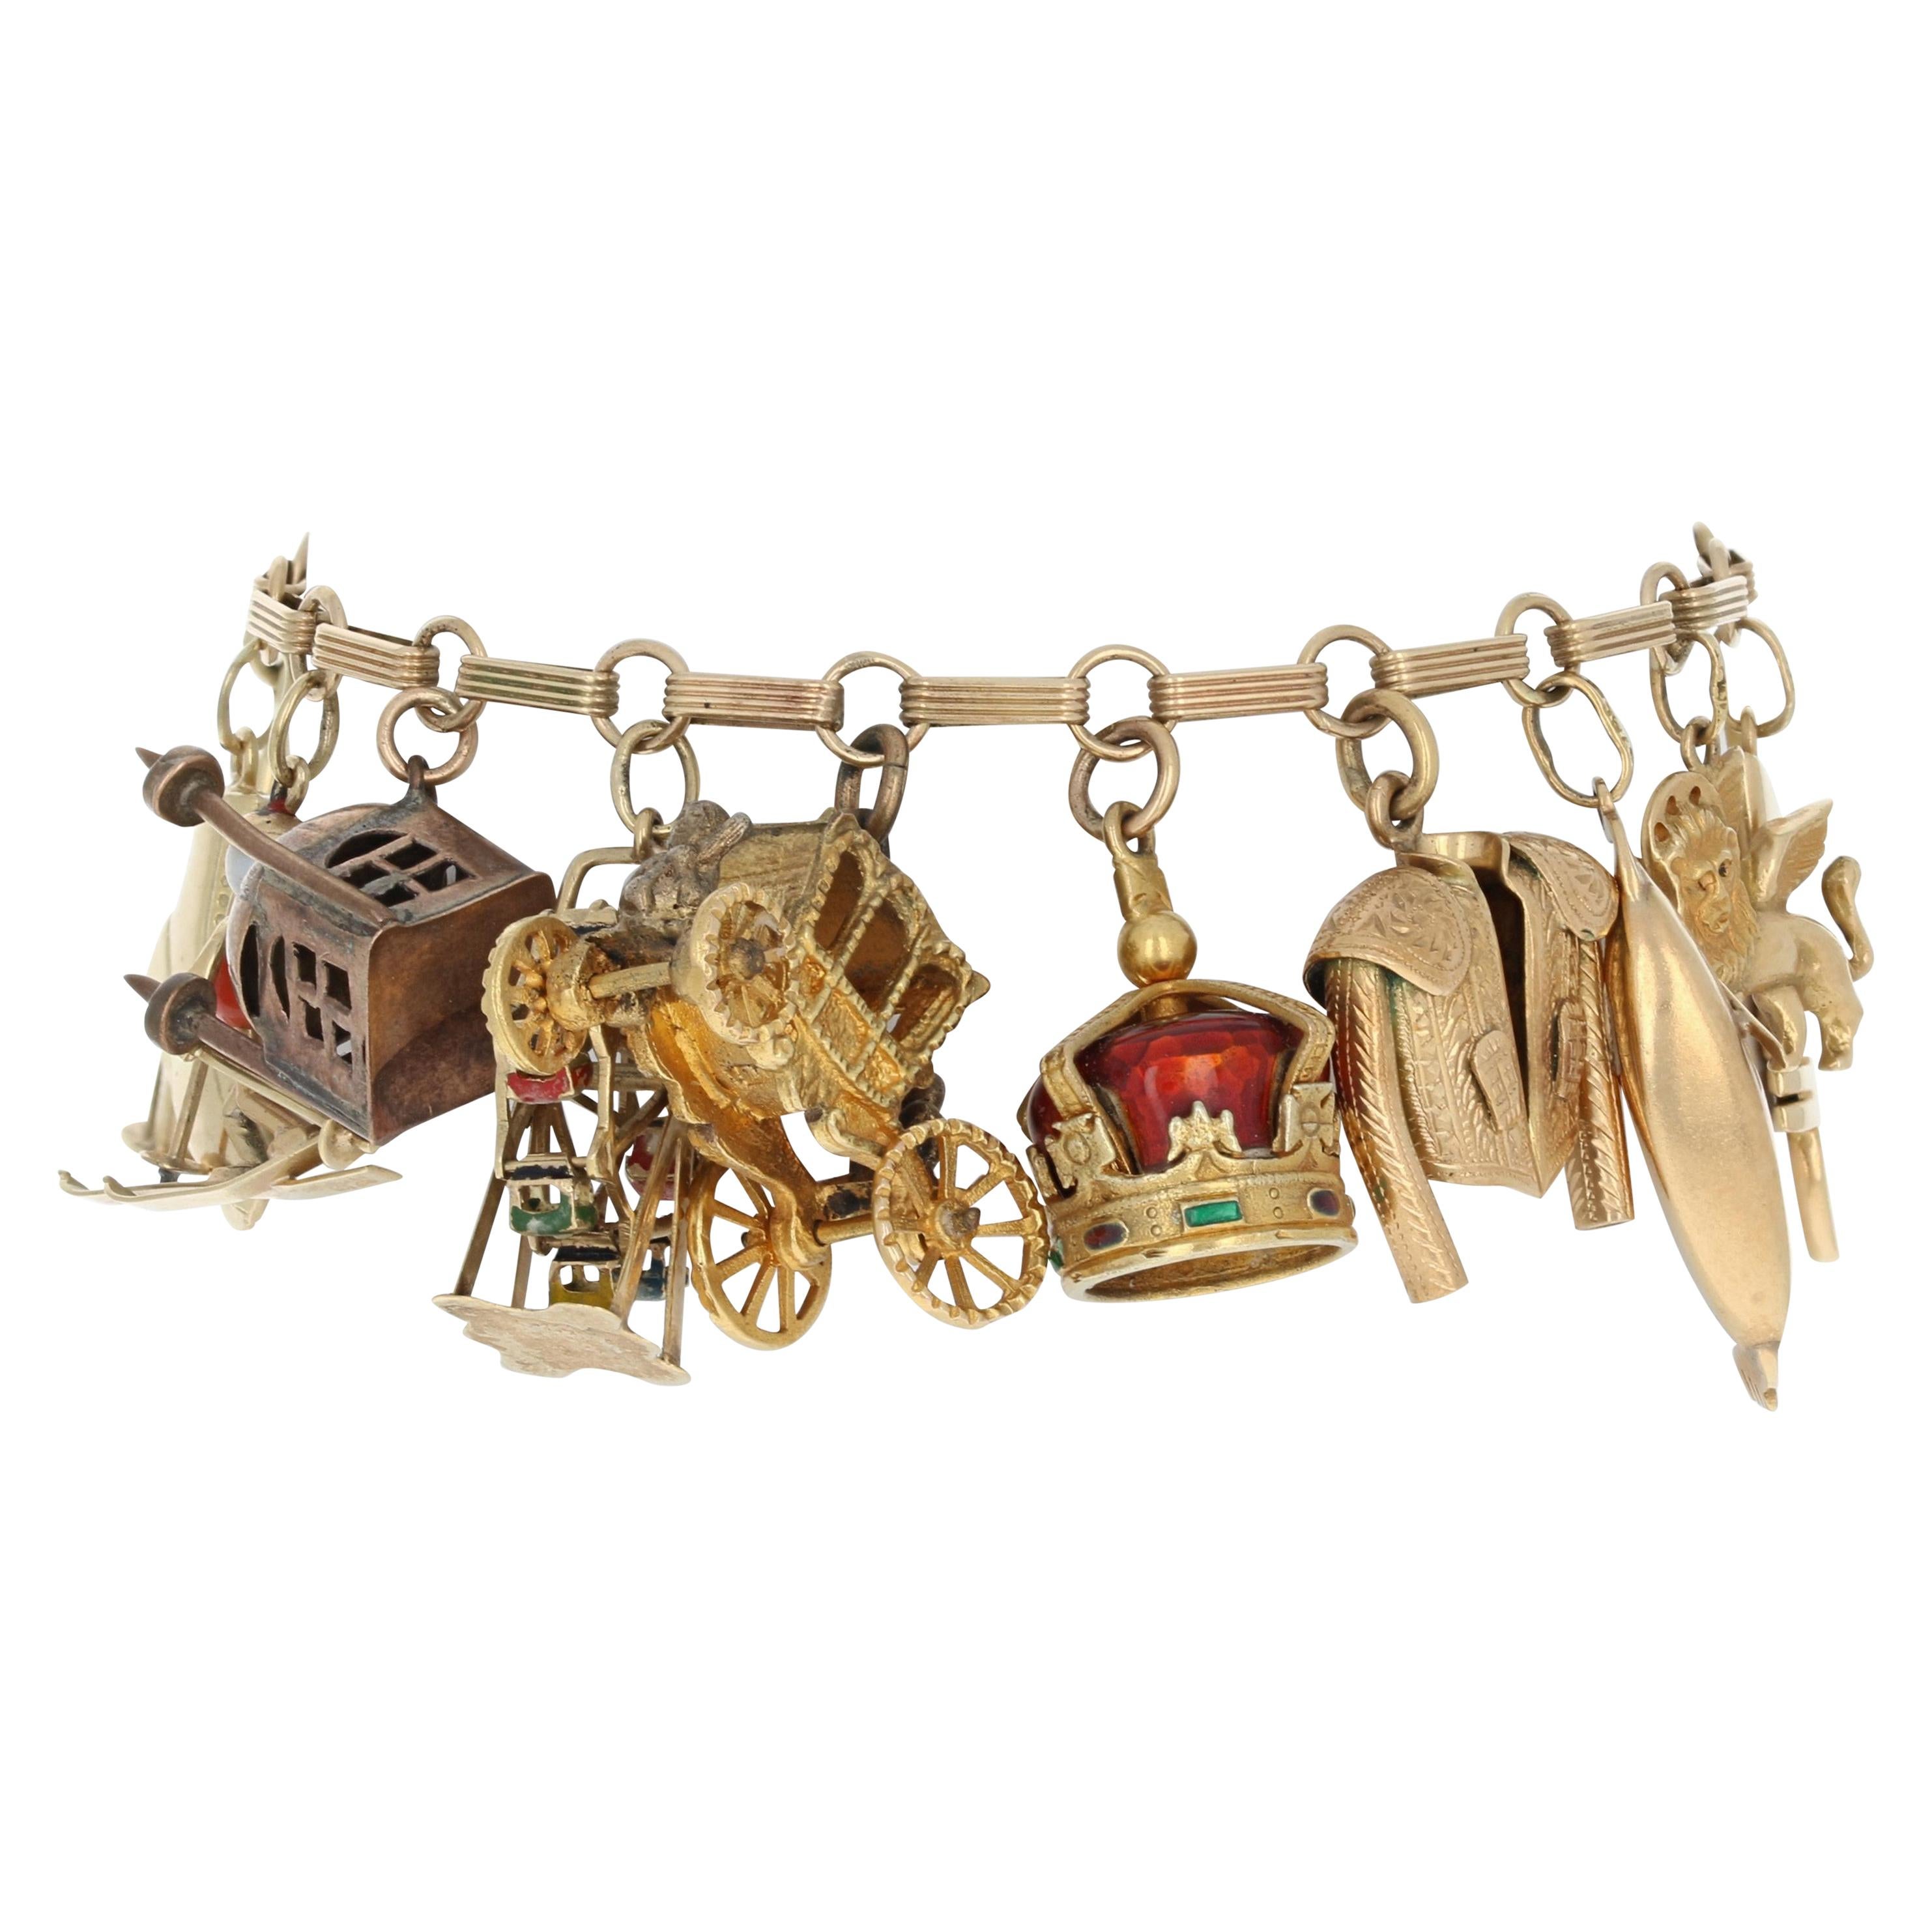 Travel and Leisure Charm Bracelet 14 Karat Gold Coral Pearl Enamel Accents